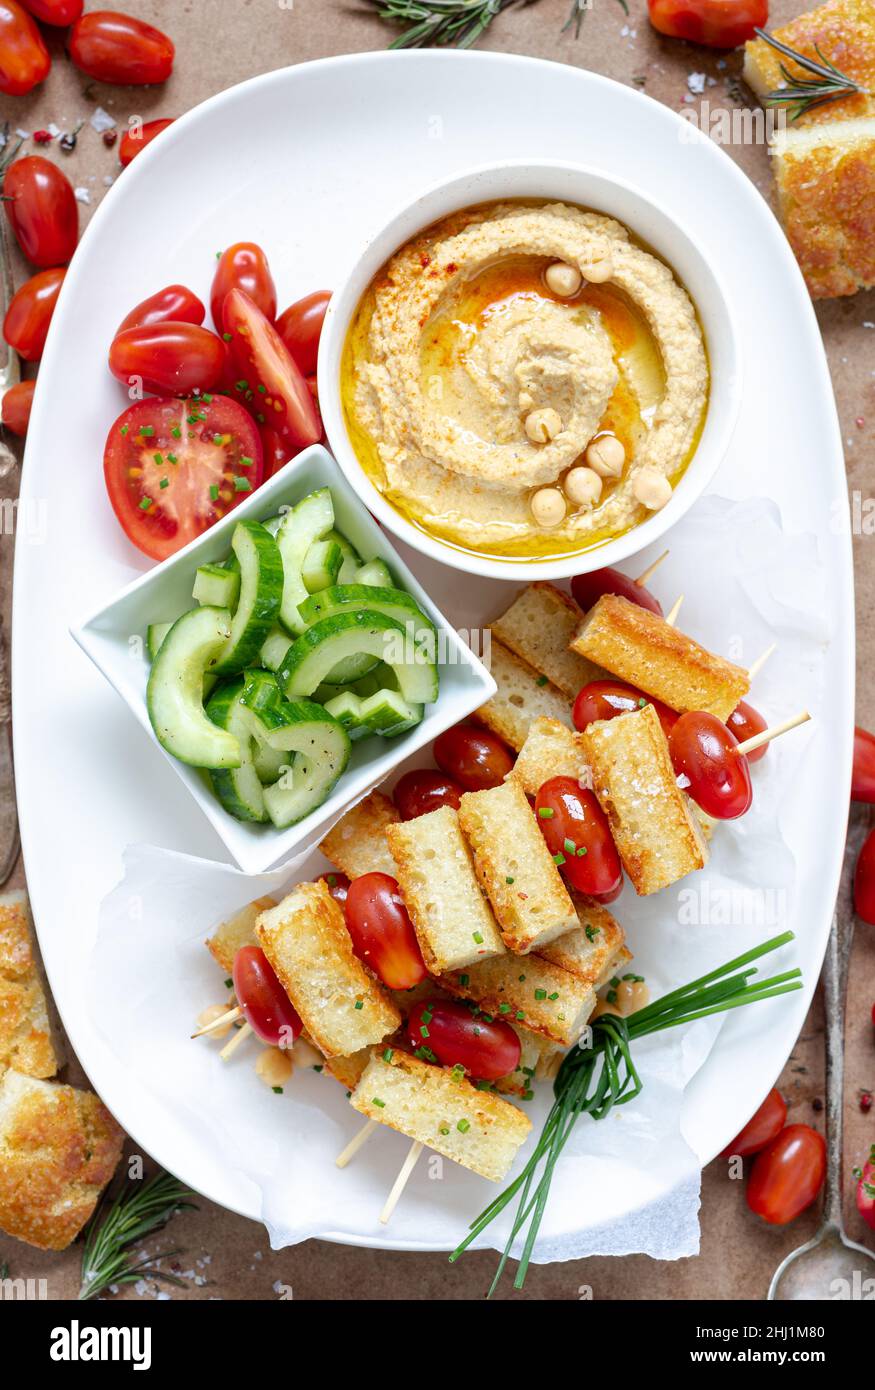 An appetizer of hummus, toasted bread and vegetables Stock Photo